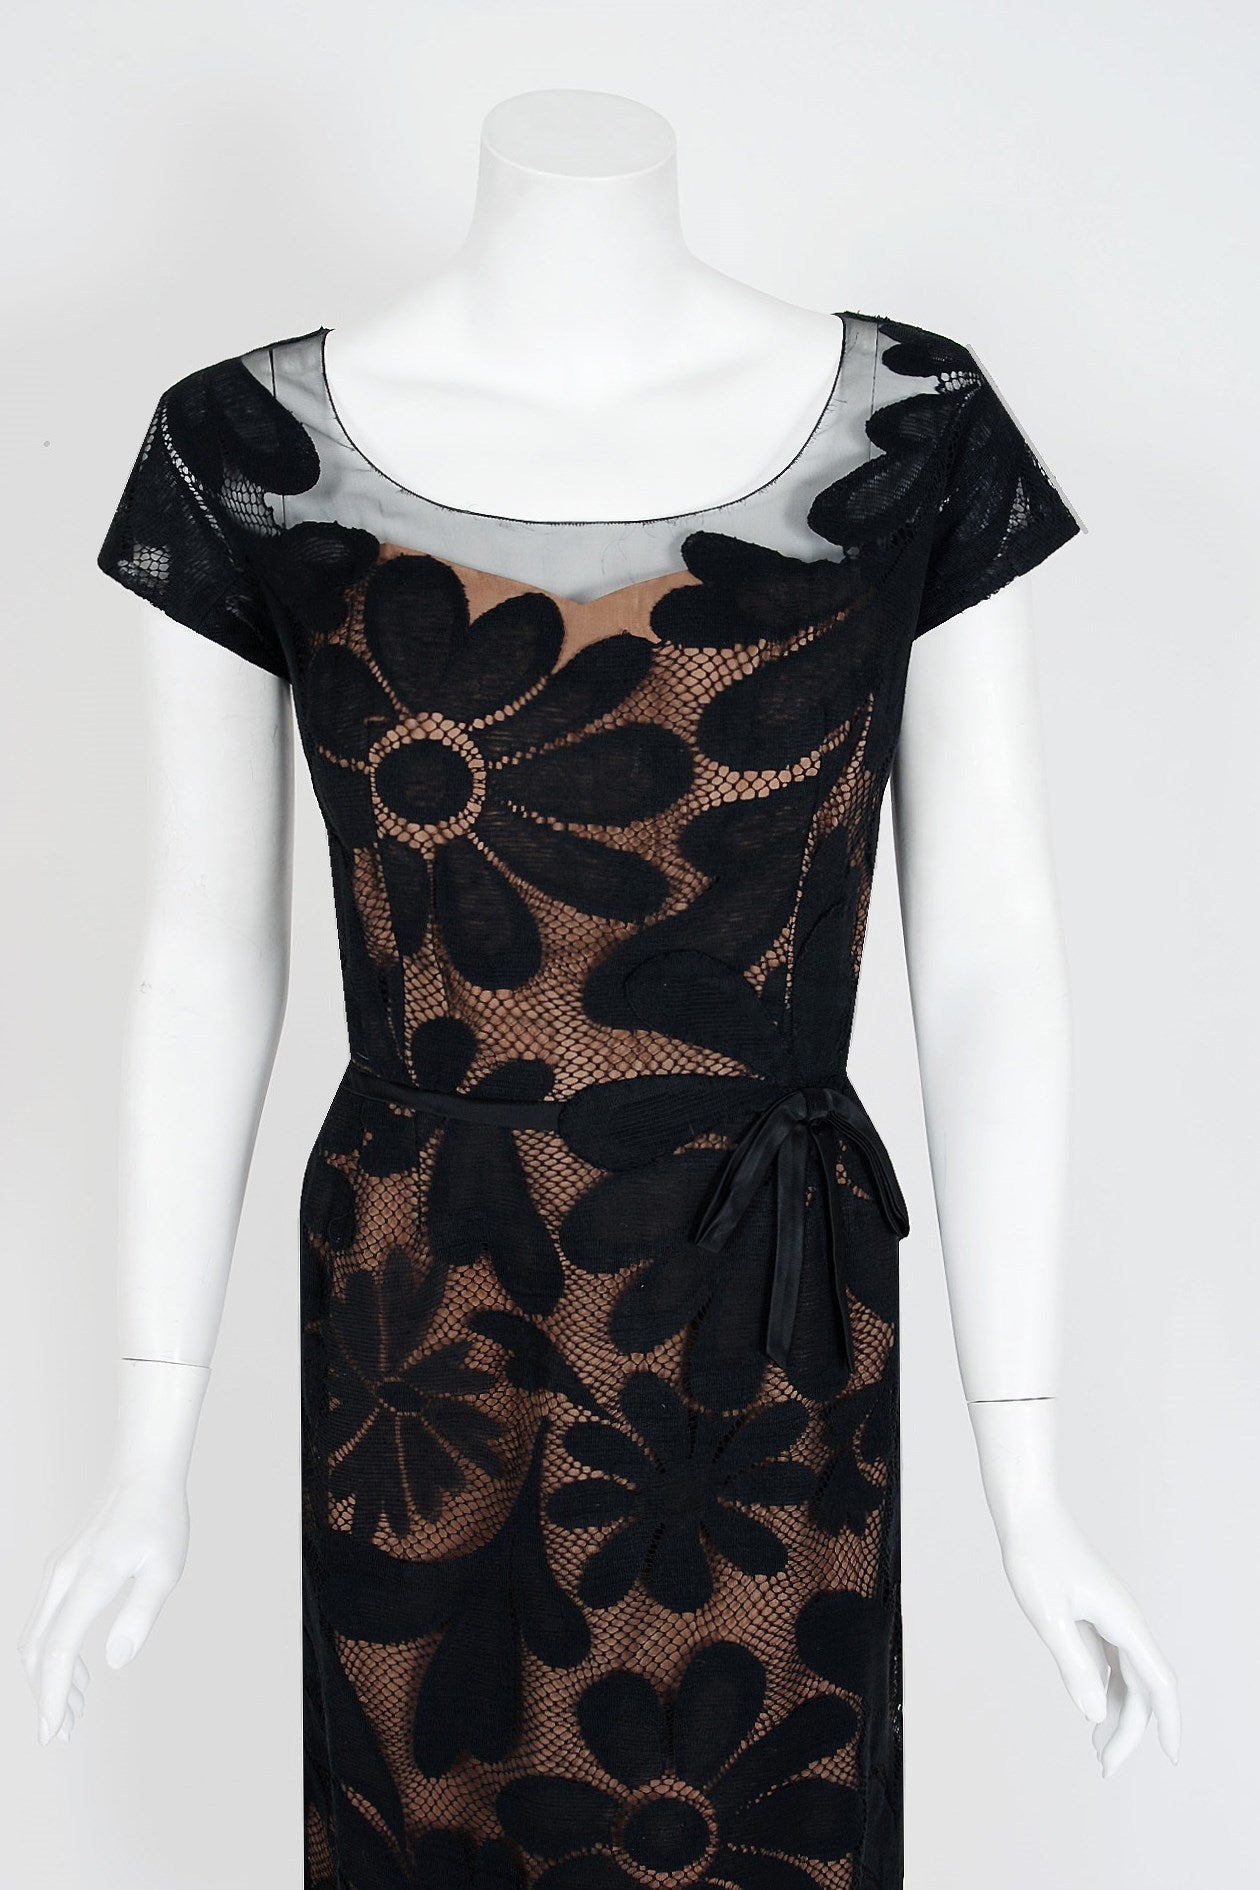 An amazing and highly stylized 1950's cocktail dress by the famous American designer Peggy Hunt. Starting in the 1930's through the early 1960's, she was immensely successful with her specialized cocktail and evening dresses. Her garments were often